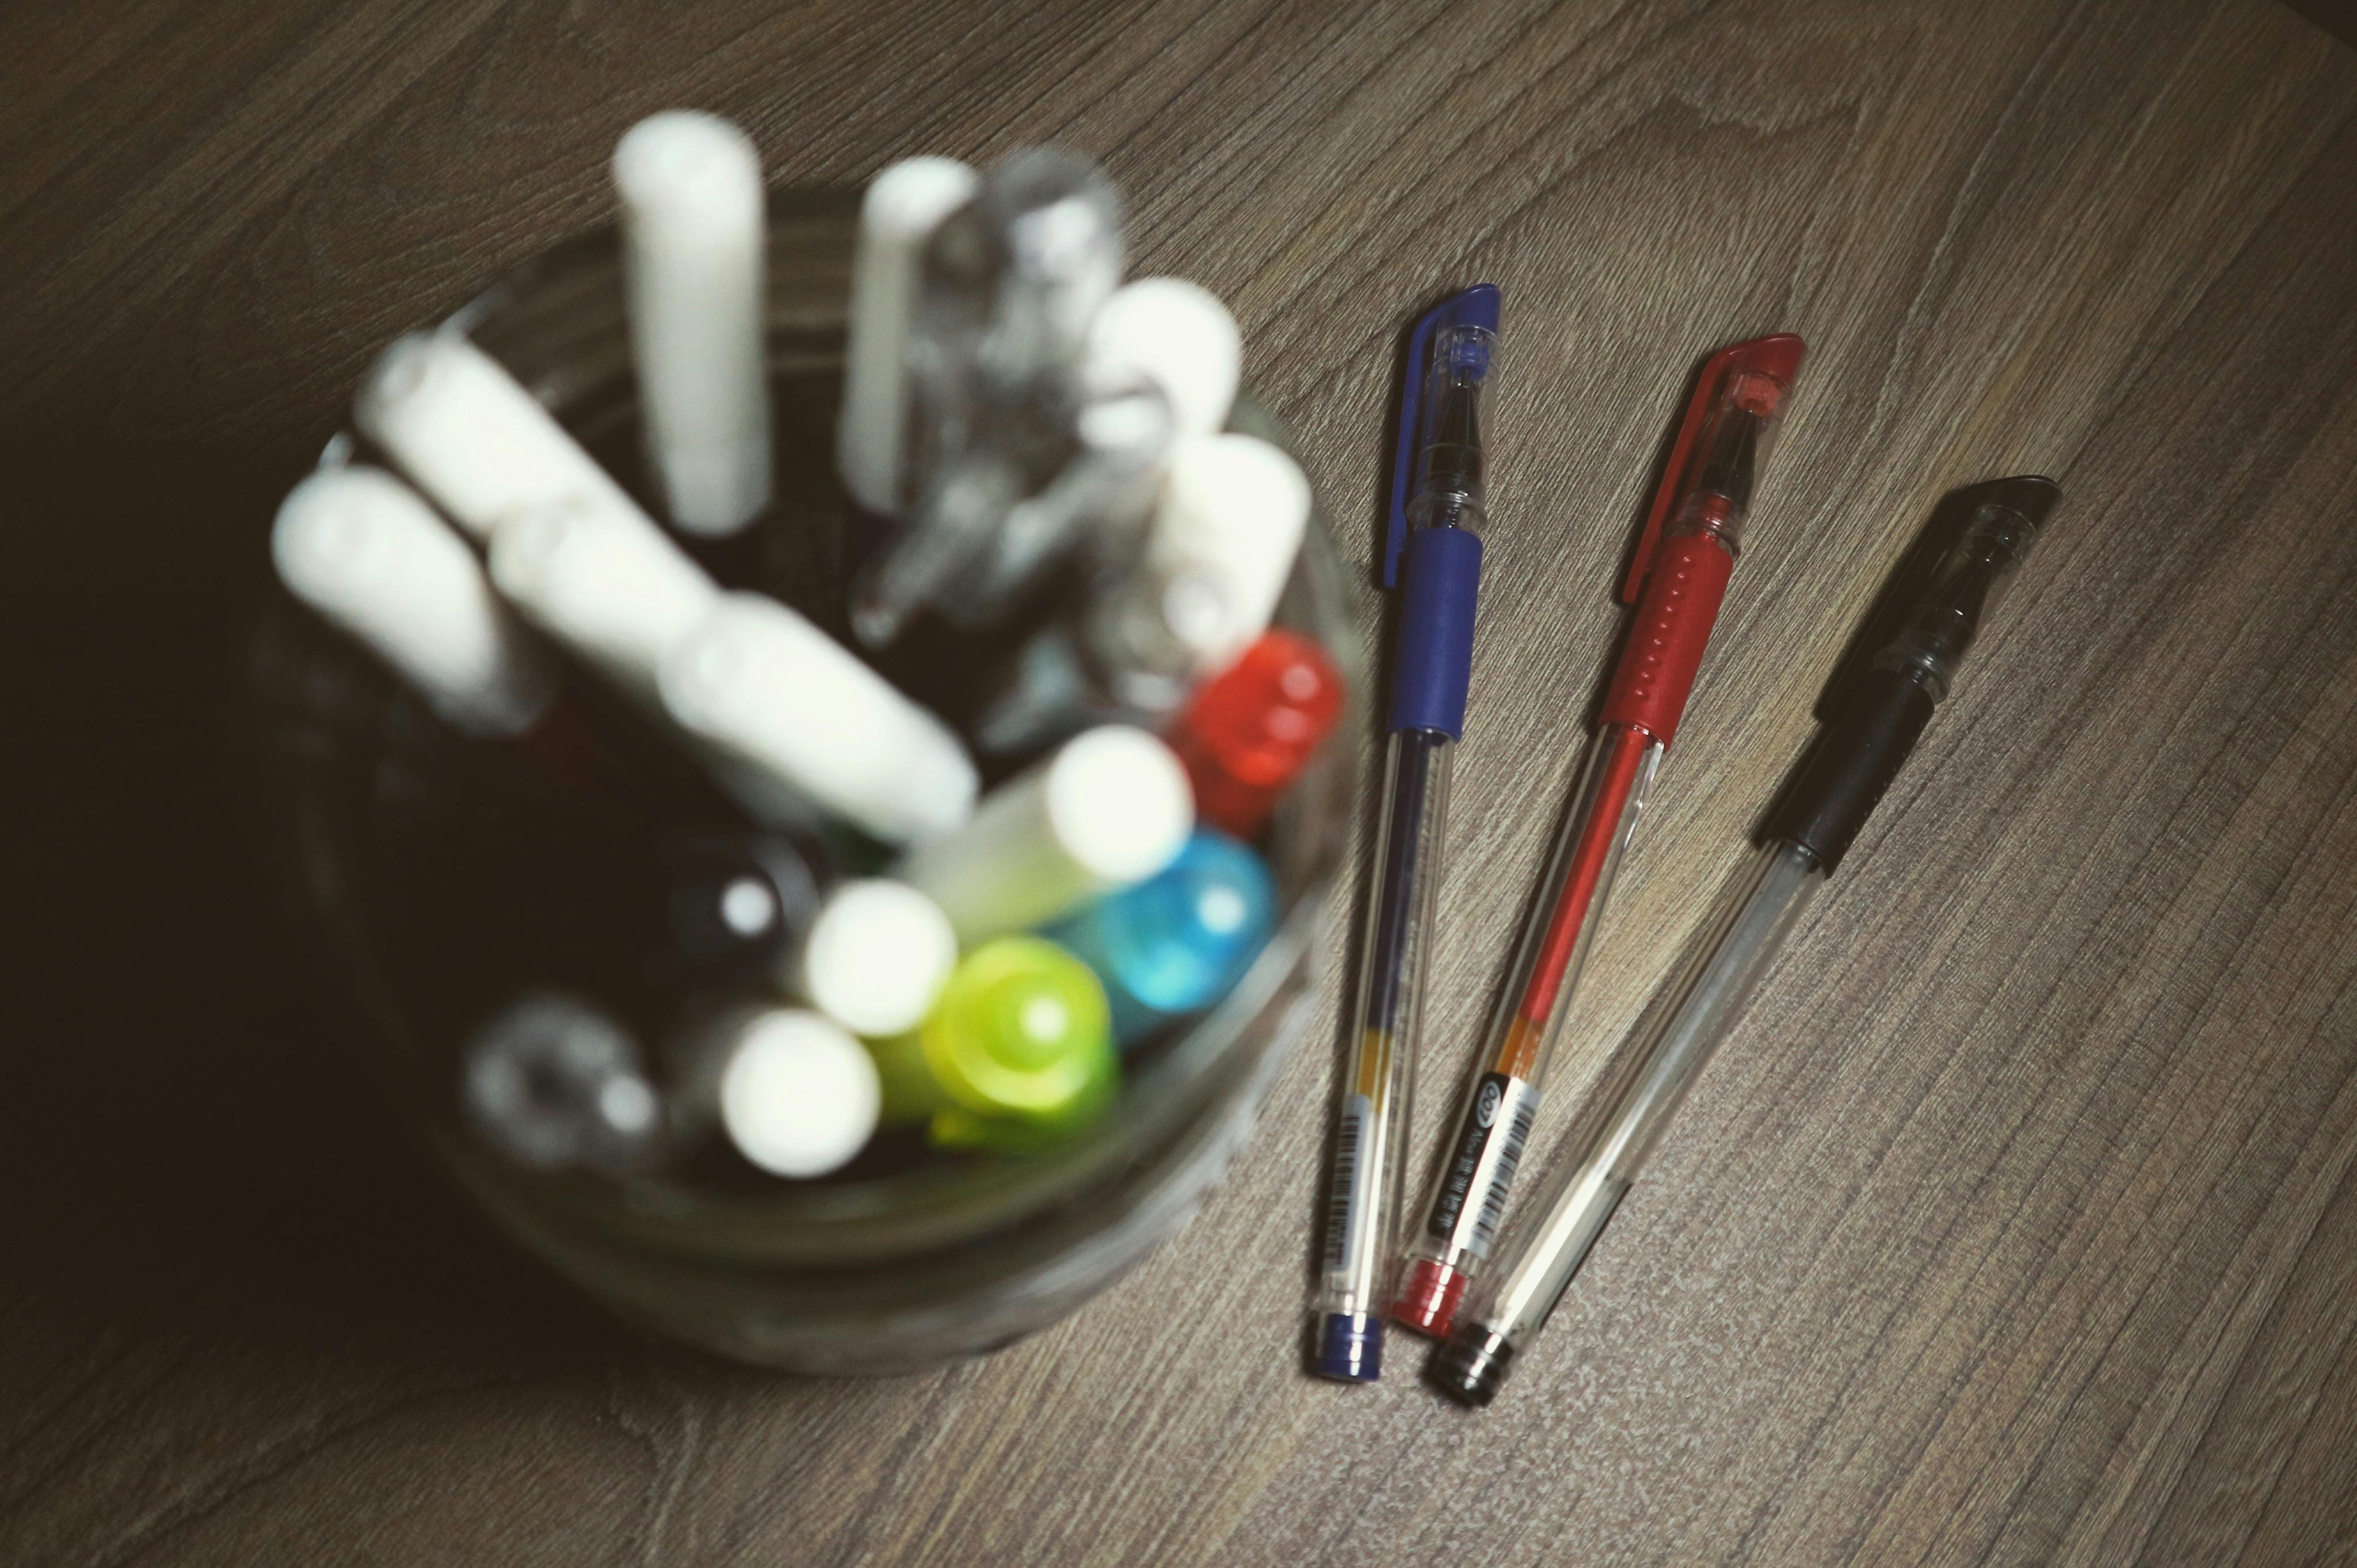 Assorted Color Ball Point Pens \u00b7 Free Stock Photo